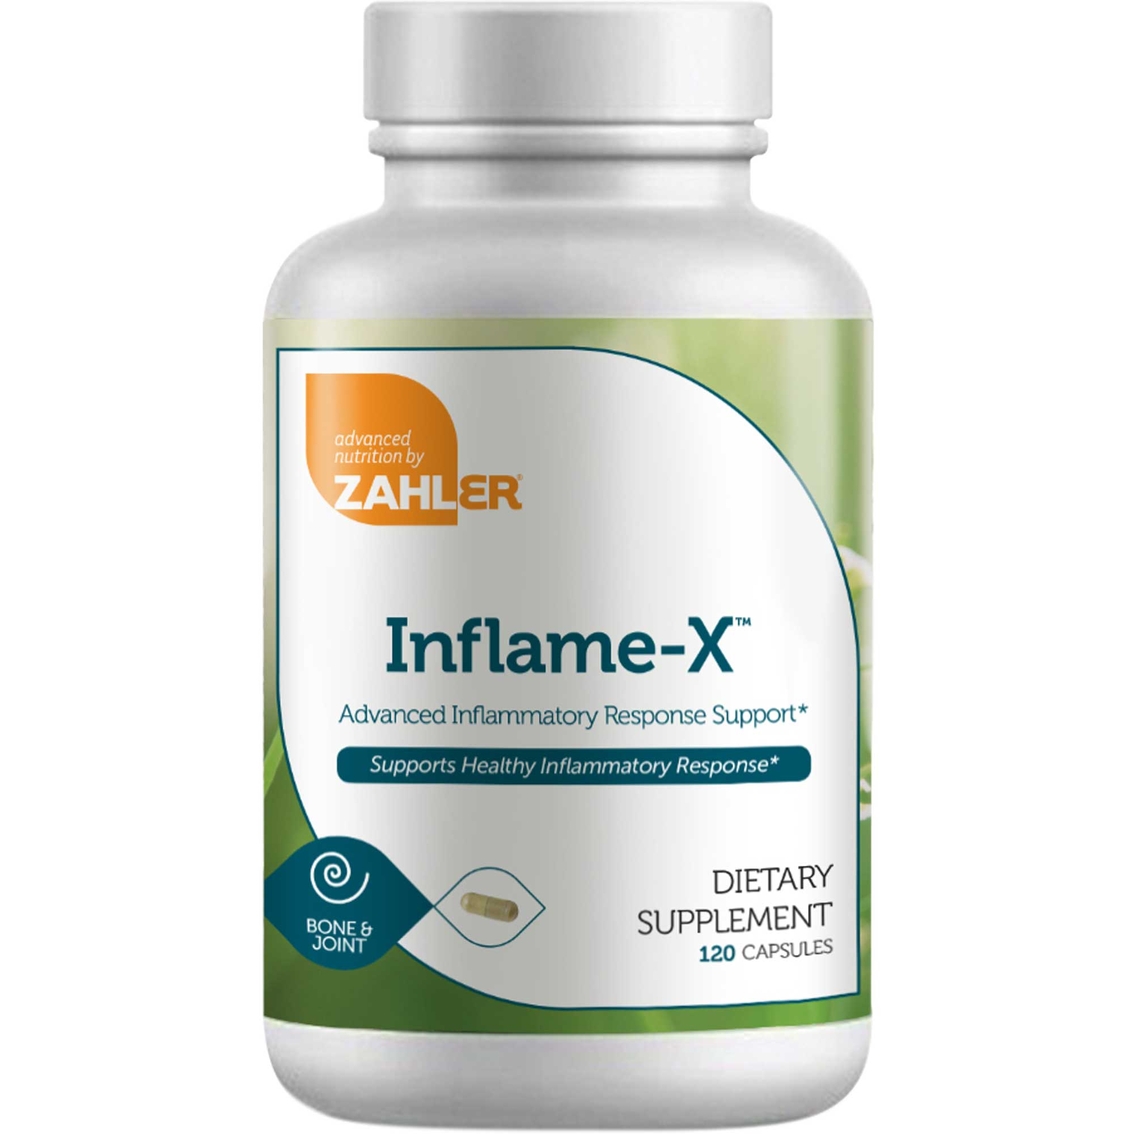 Zahler Inflame X Anti Inflammatory Supplement Certified Kosher Capsules 120 ct. - Image 1 of 5